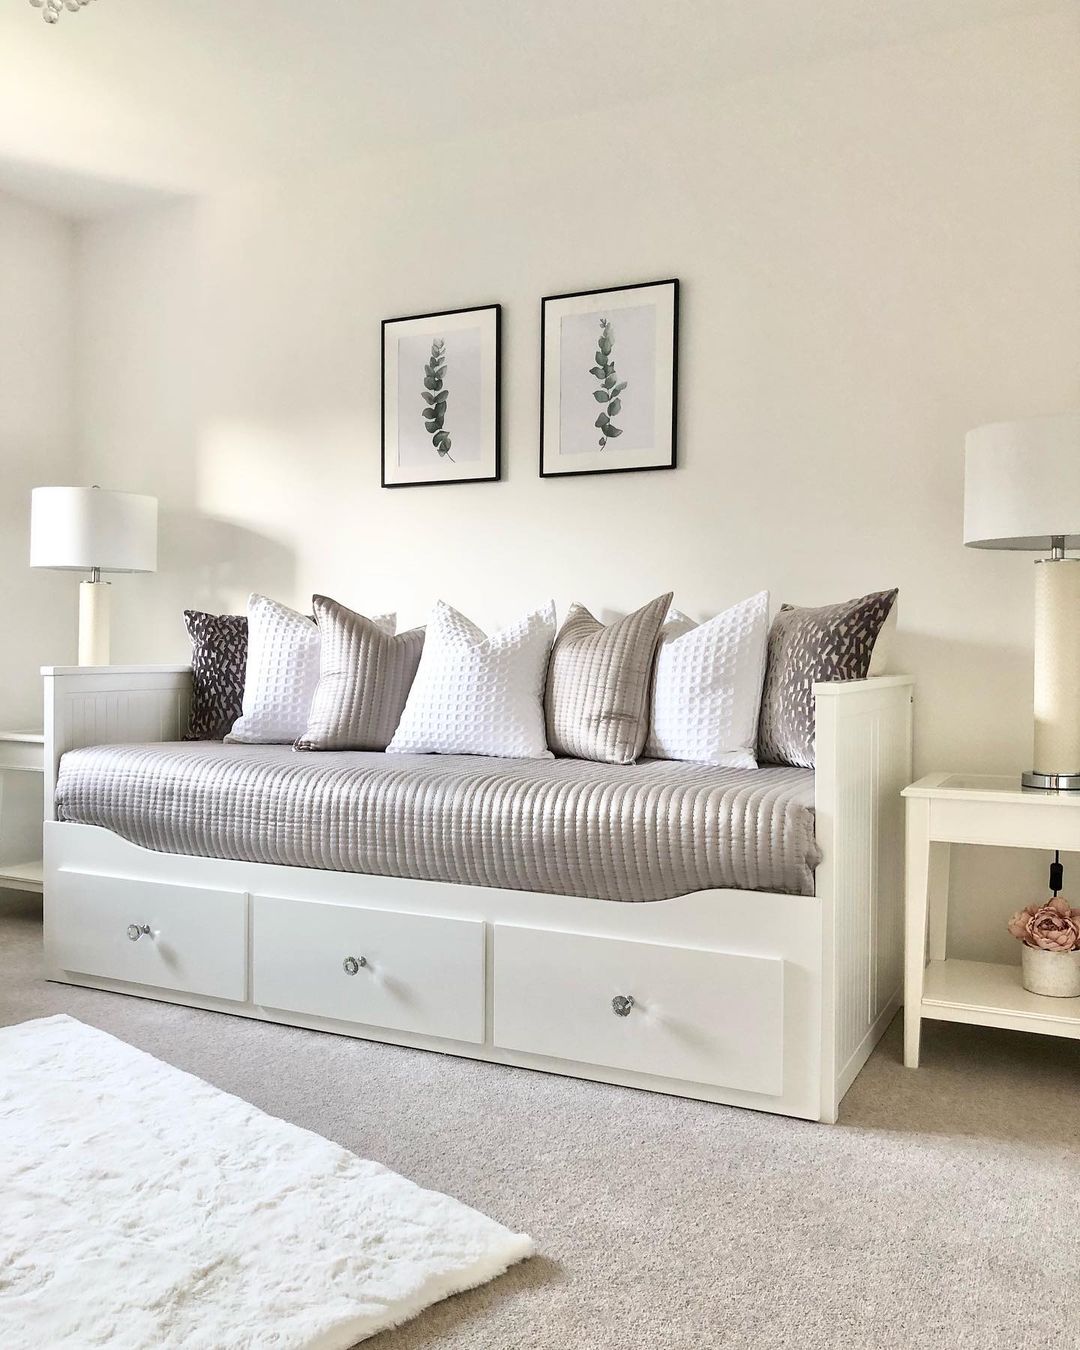 Shaker style white daybed. Photo by Instagram user @_myhomeinspo_